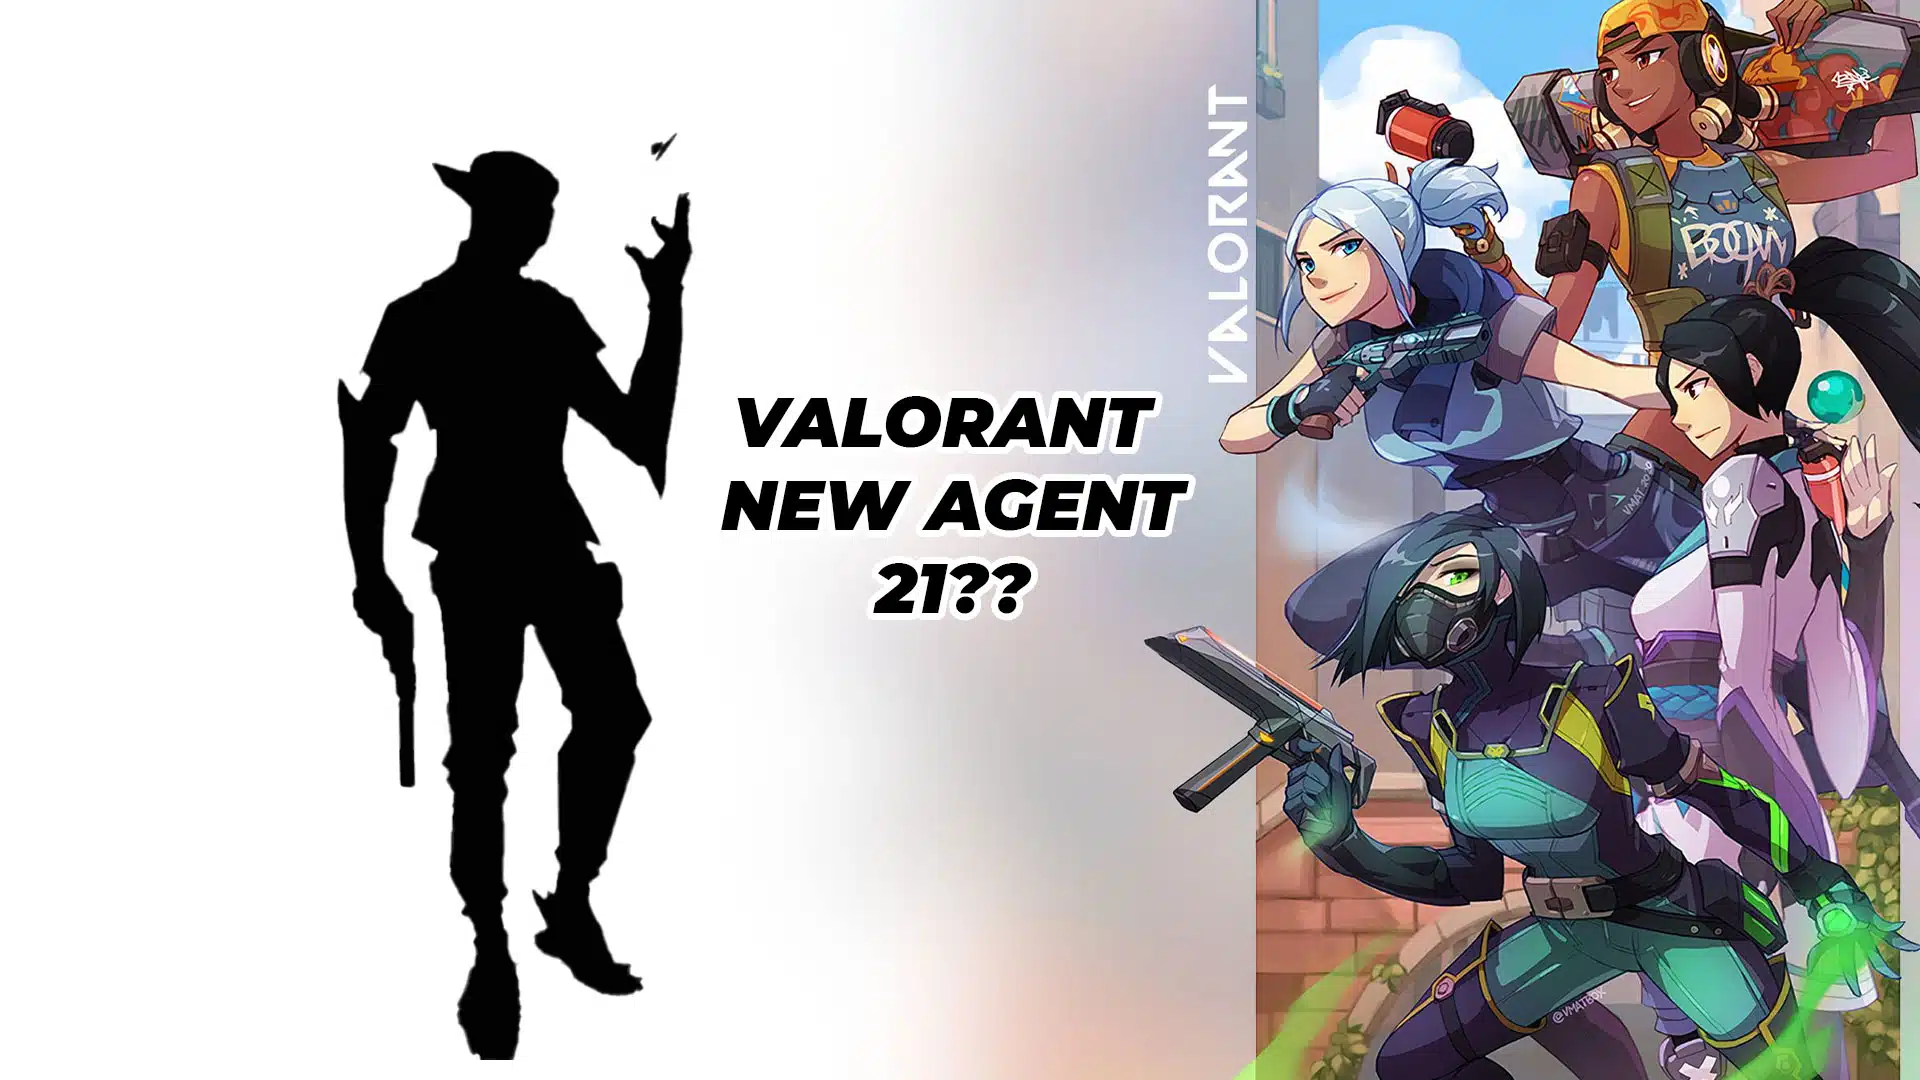 Valorant Agent 21: Abilities, Codename, and More